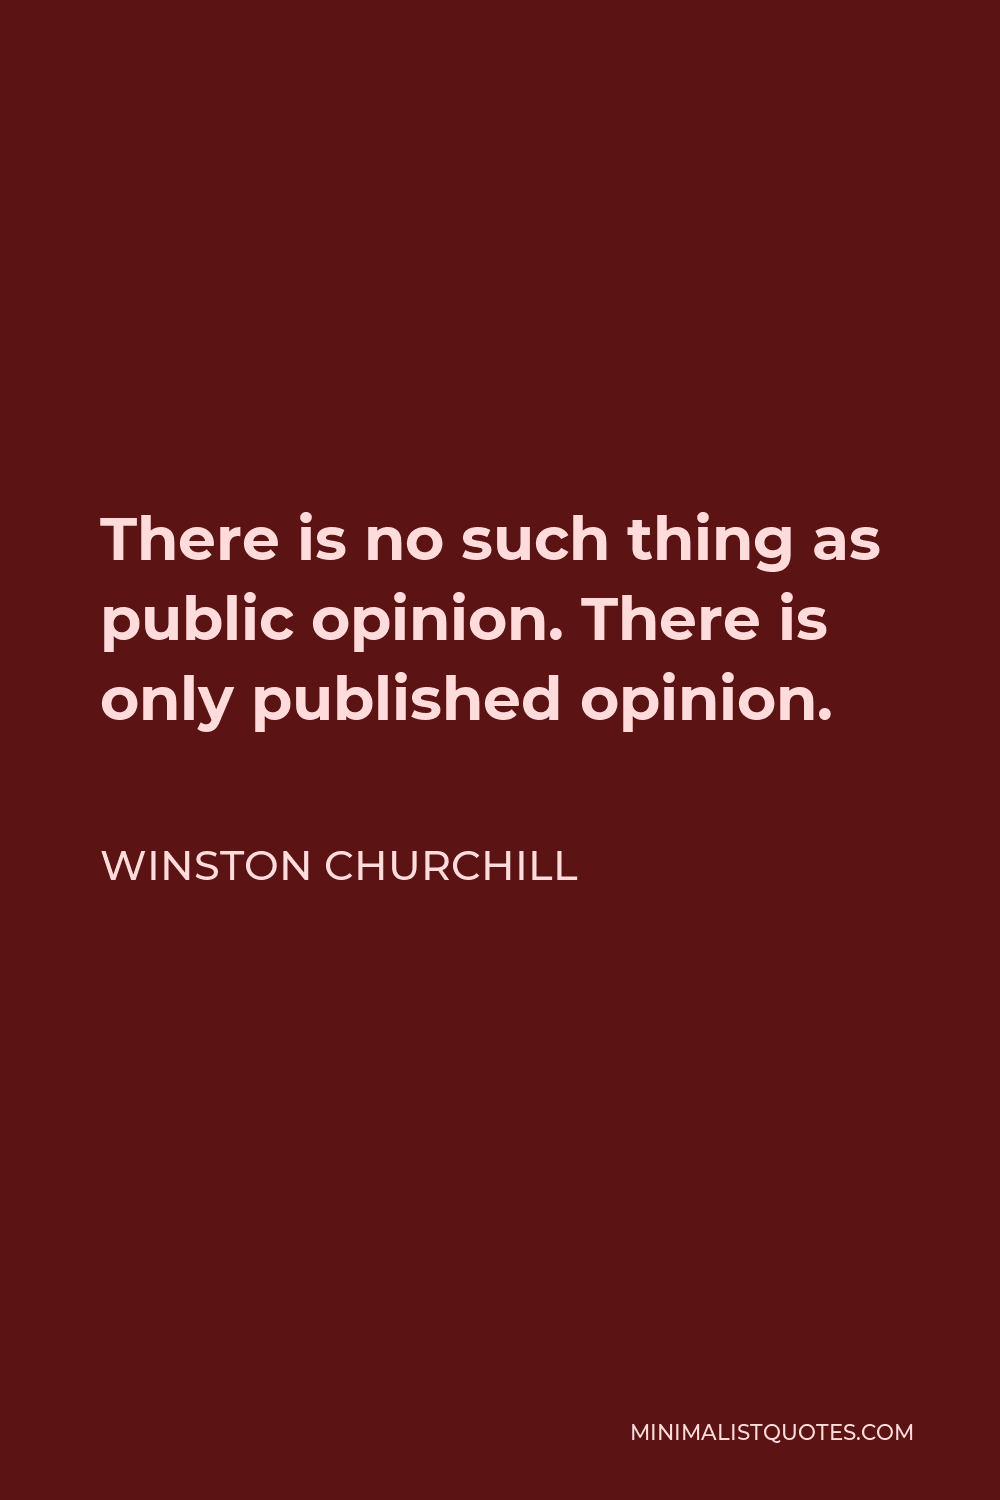 Winston Churchill Quote - There is no such thing as public opinion. There is only published opinion.